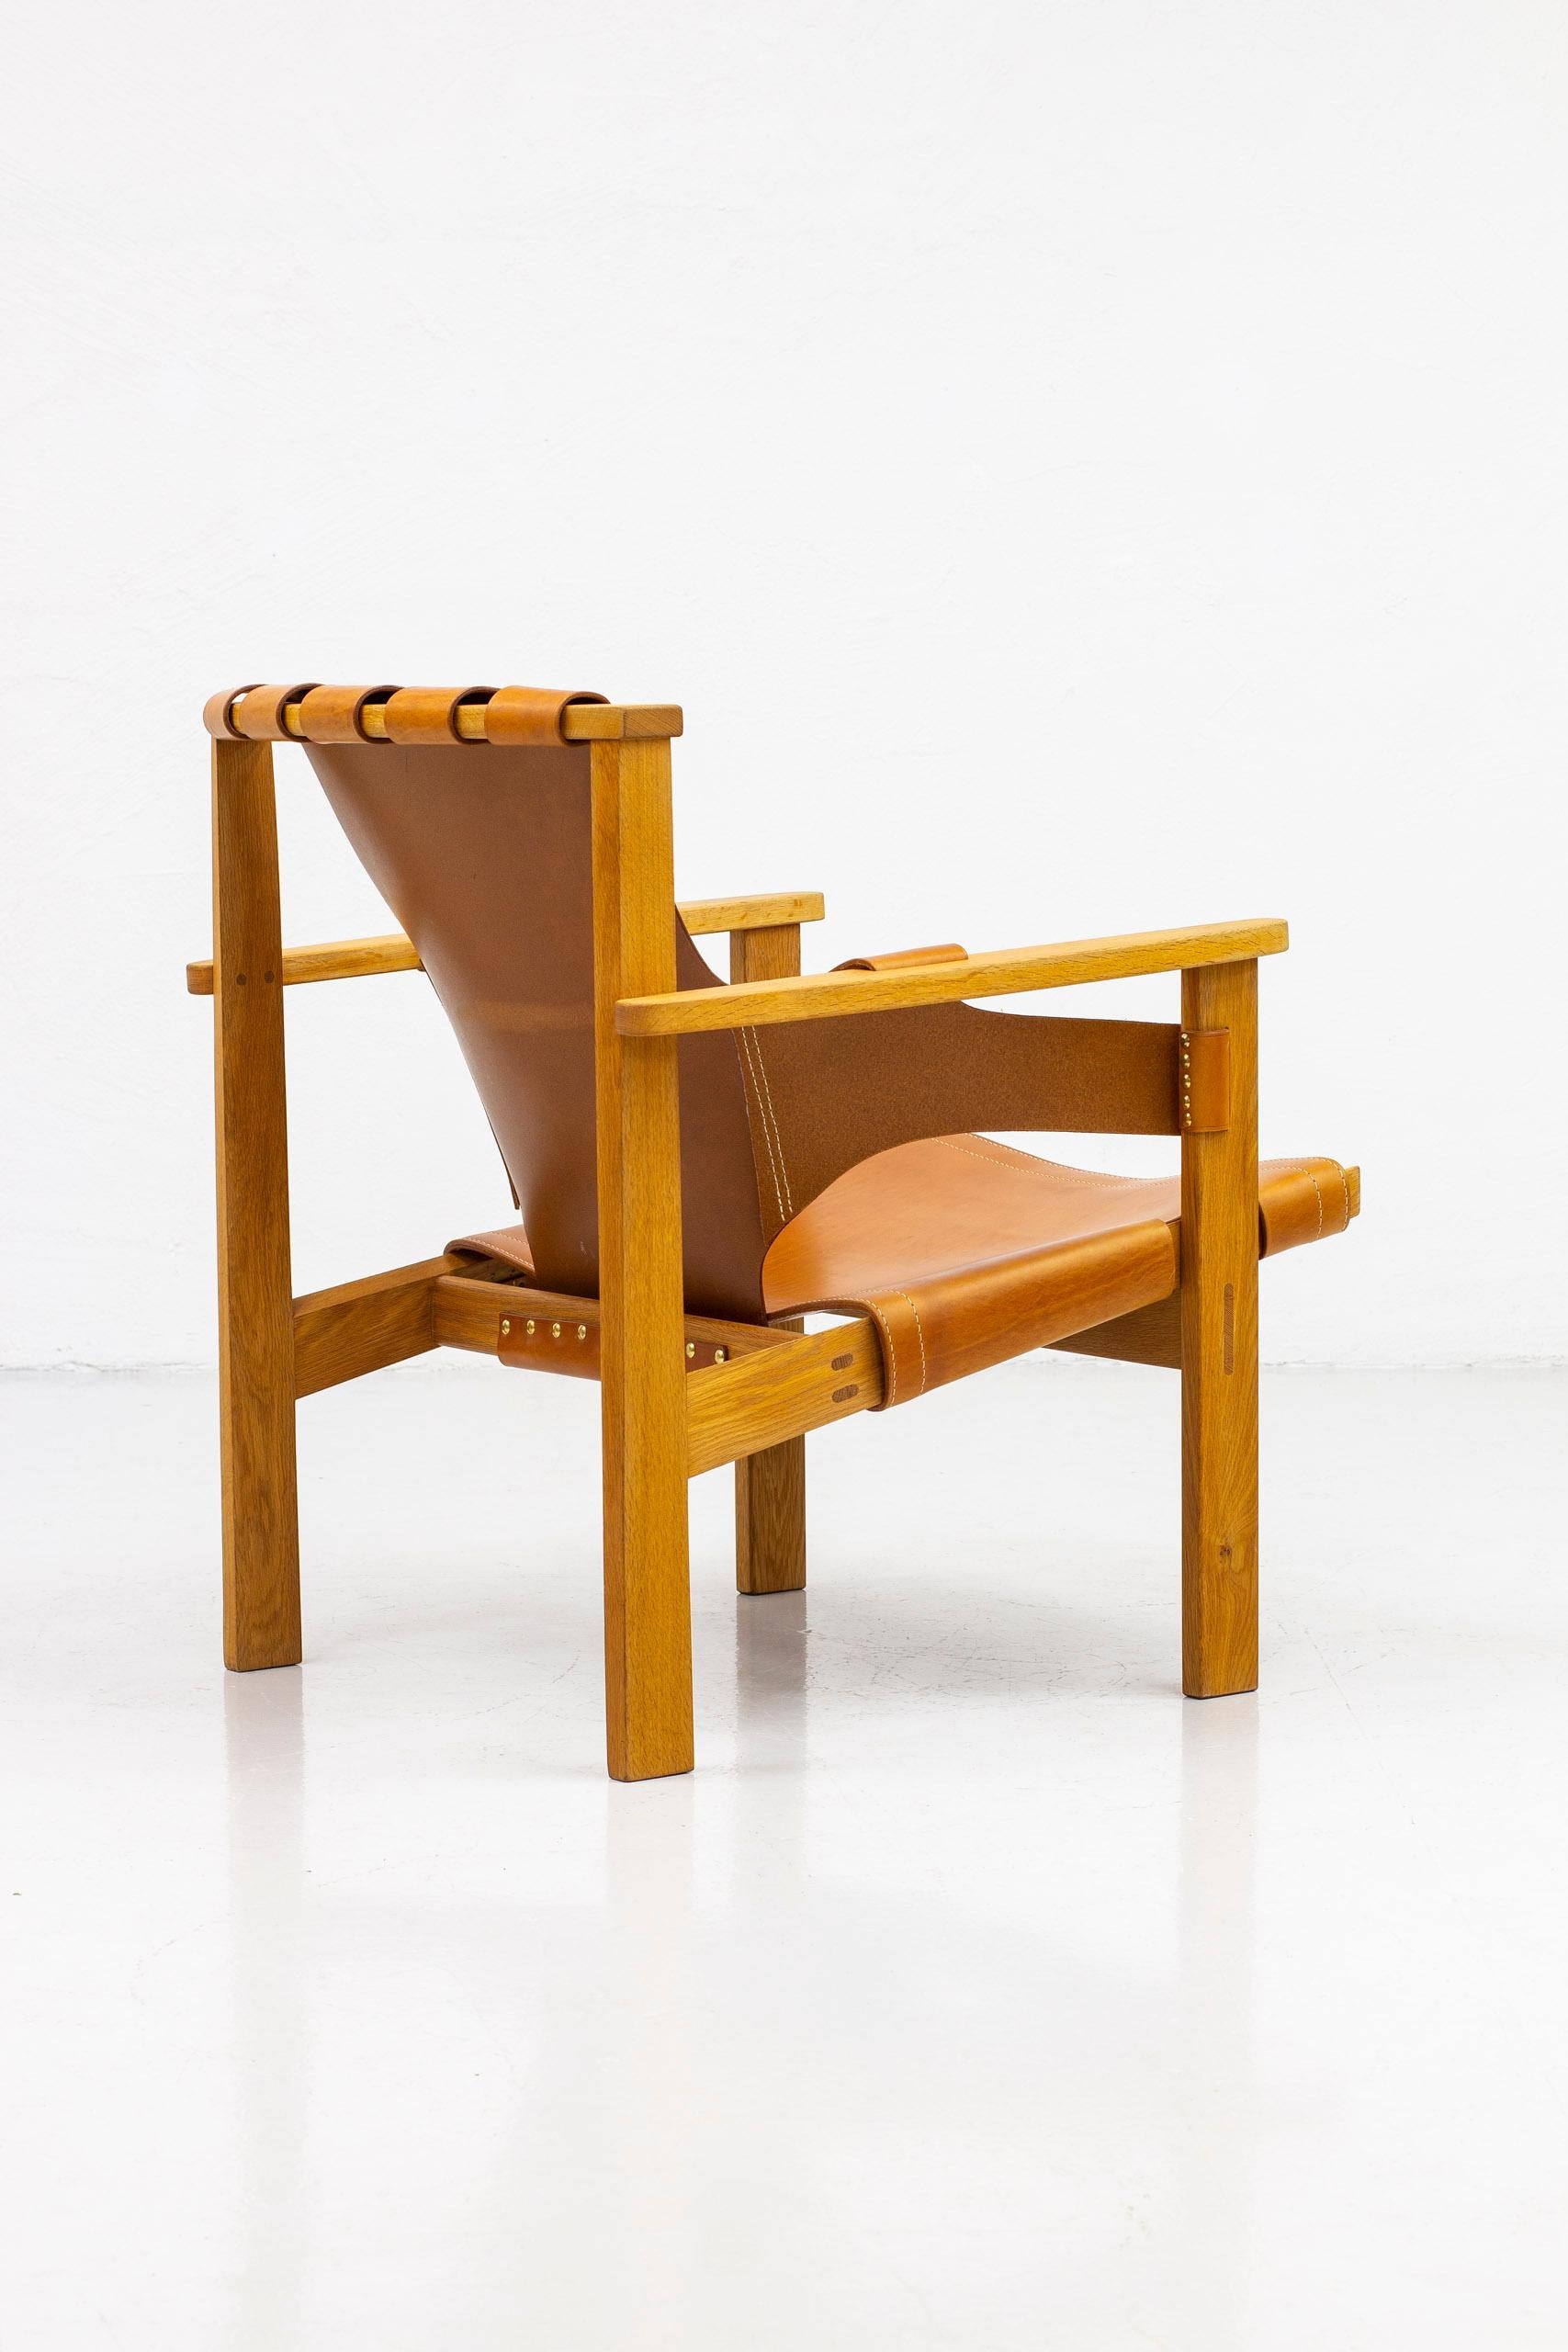 Lounge Chairs in Oak and Leather by Carl-Axel Acking, Nk, Nordiska Kompaniet 10